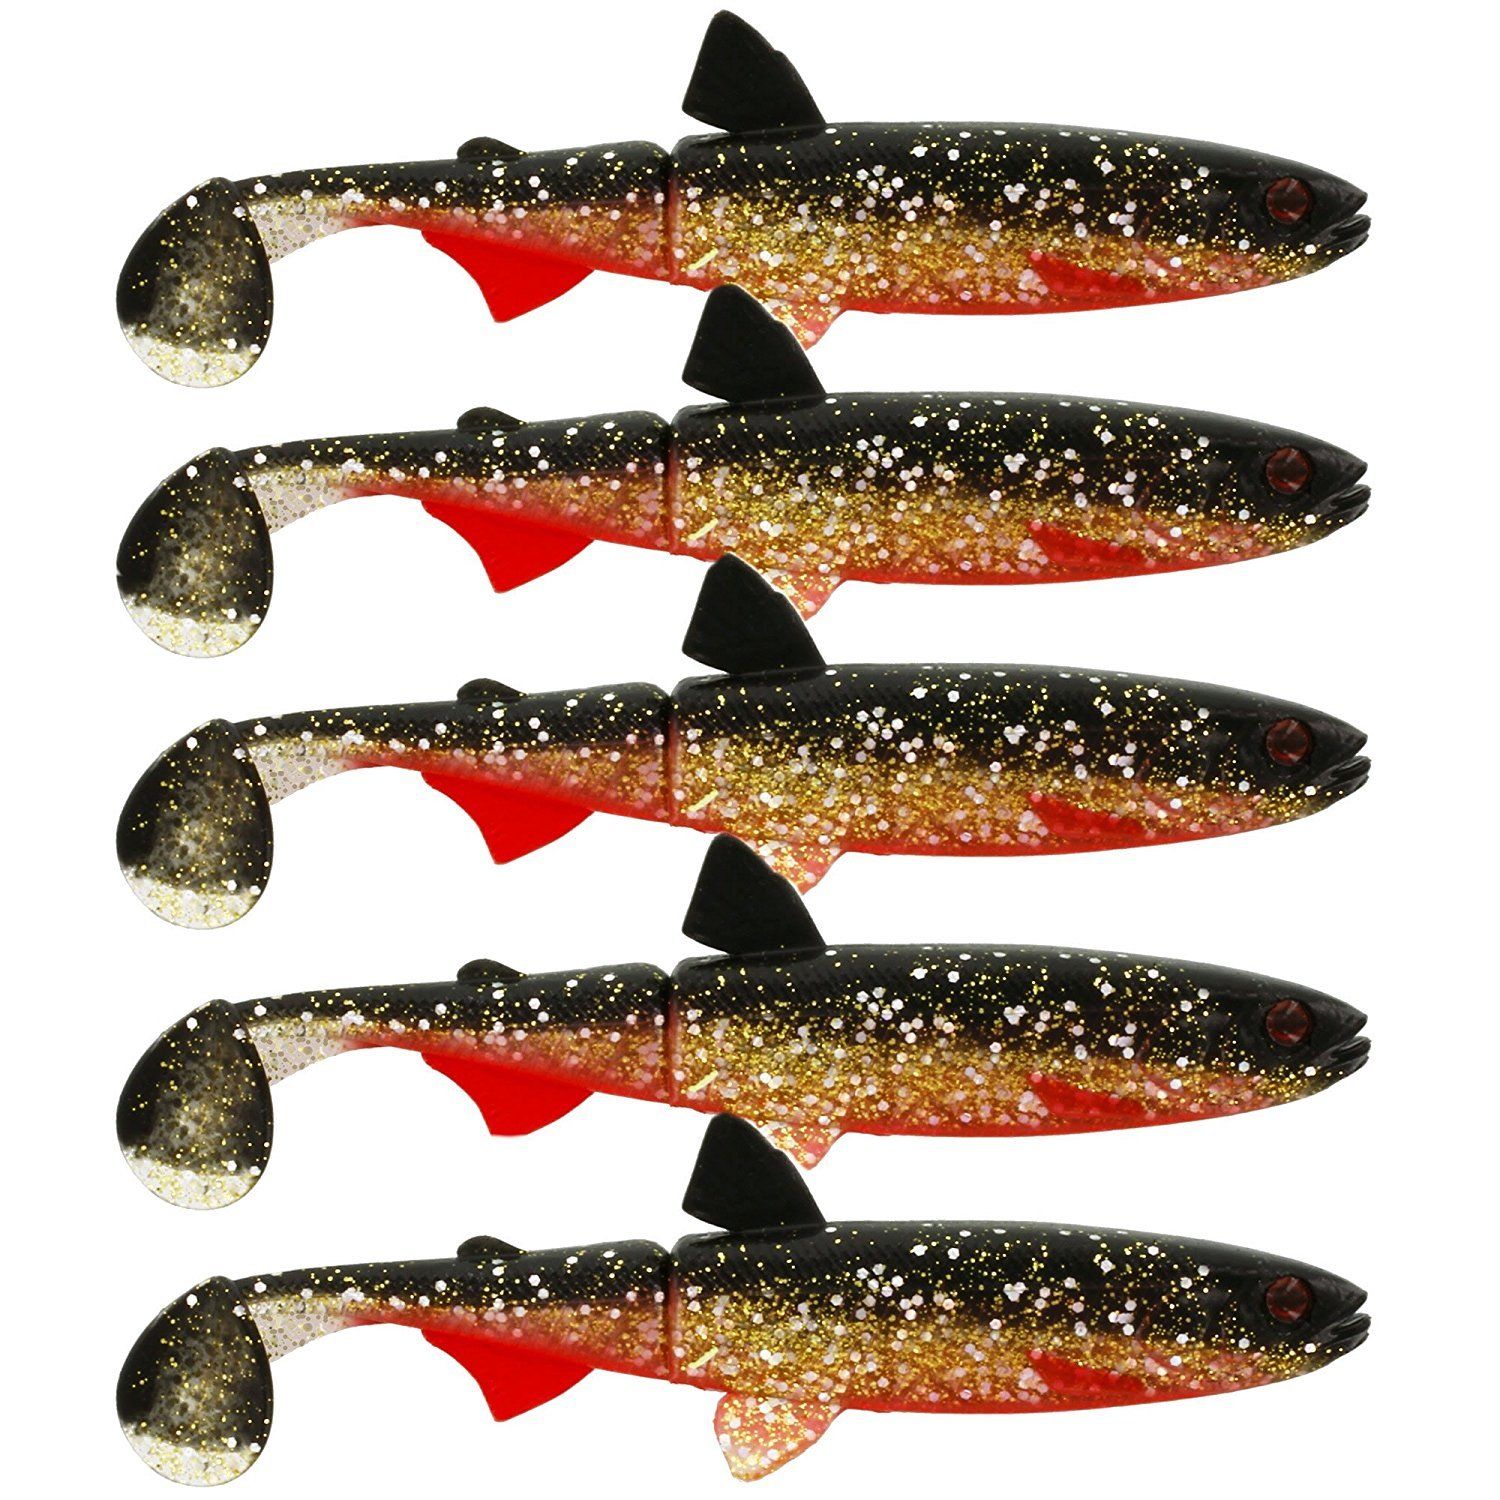 Westin WS01309 5398-0008 Hypo Teez Alabama Rig 5 Pack 5" Paddle Tail Lure GOLD